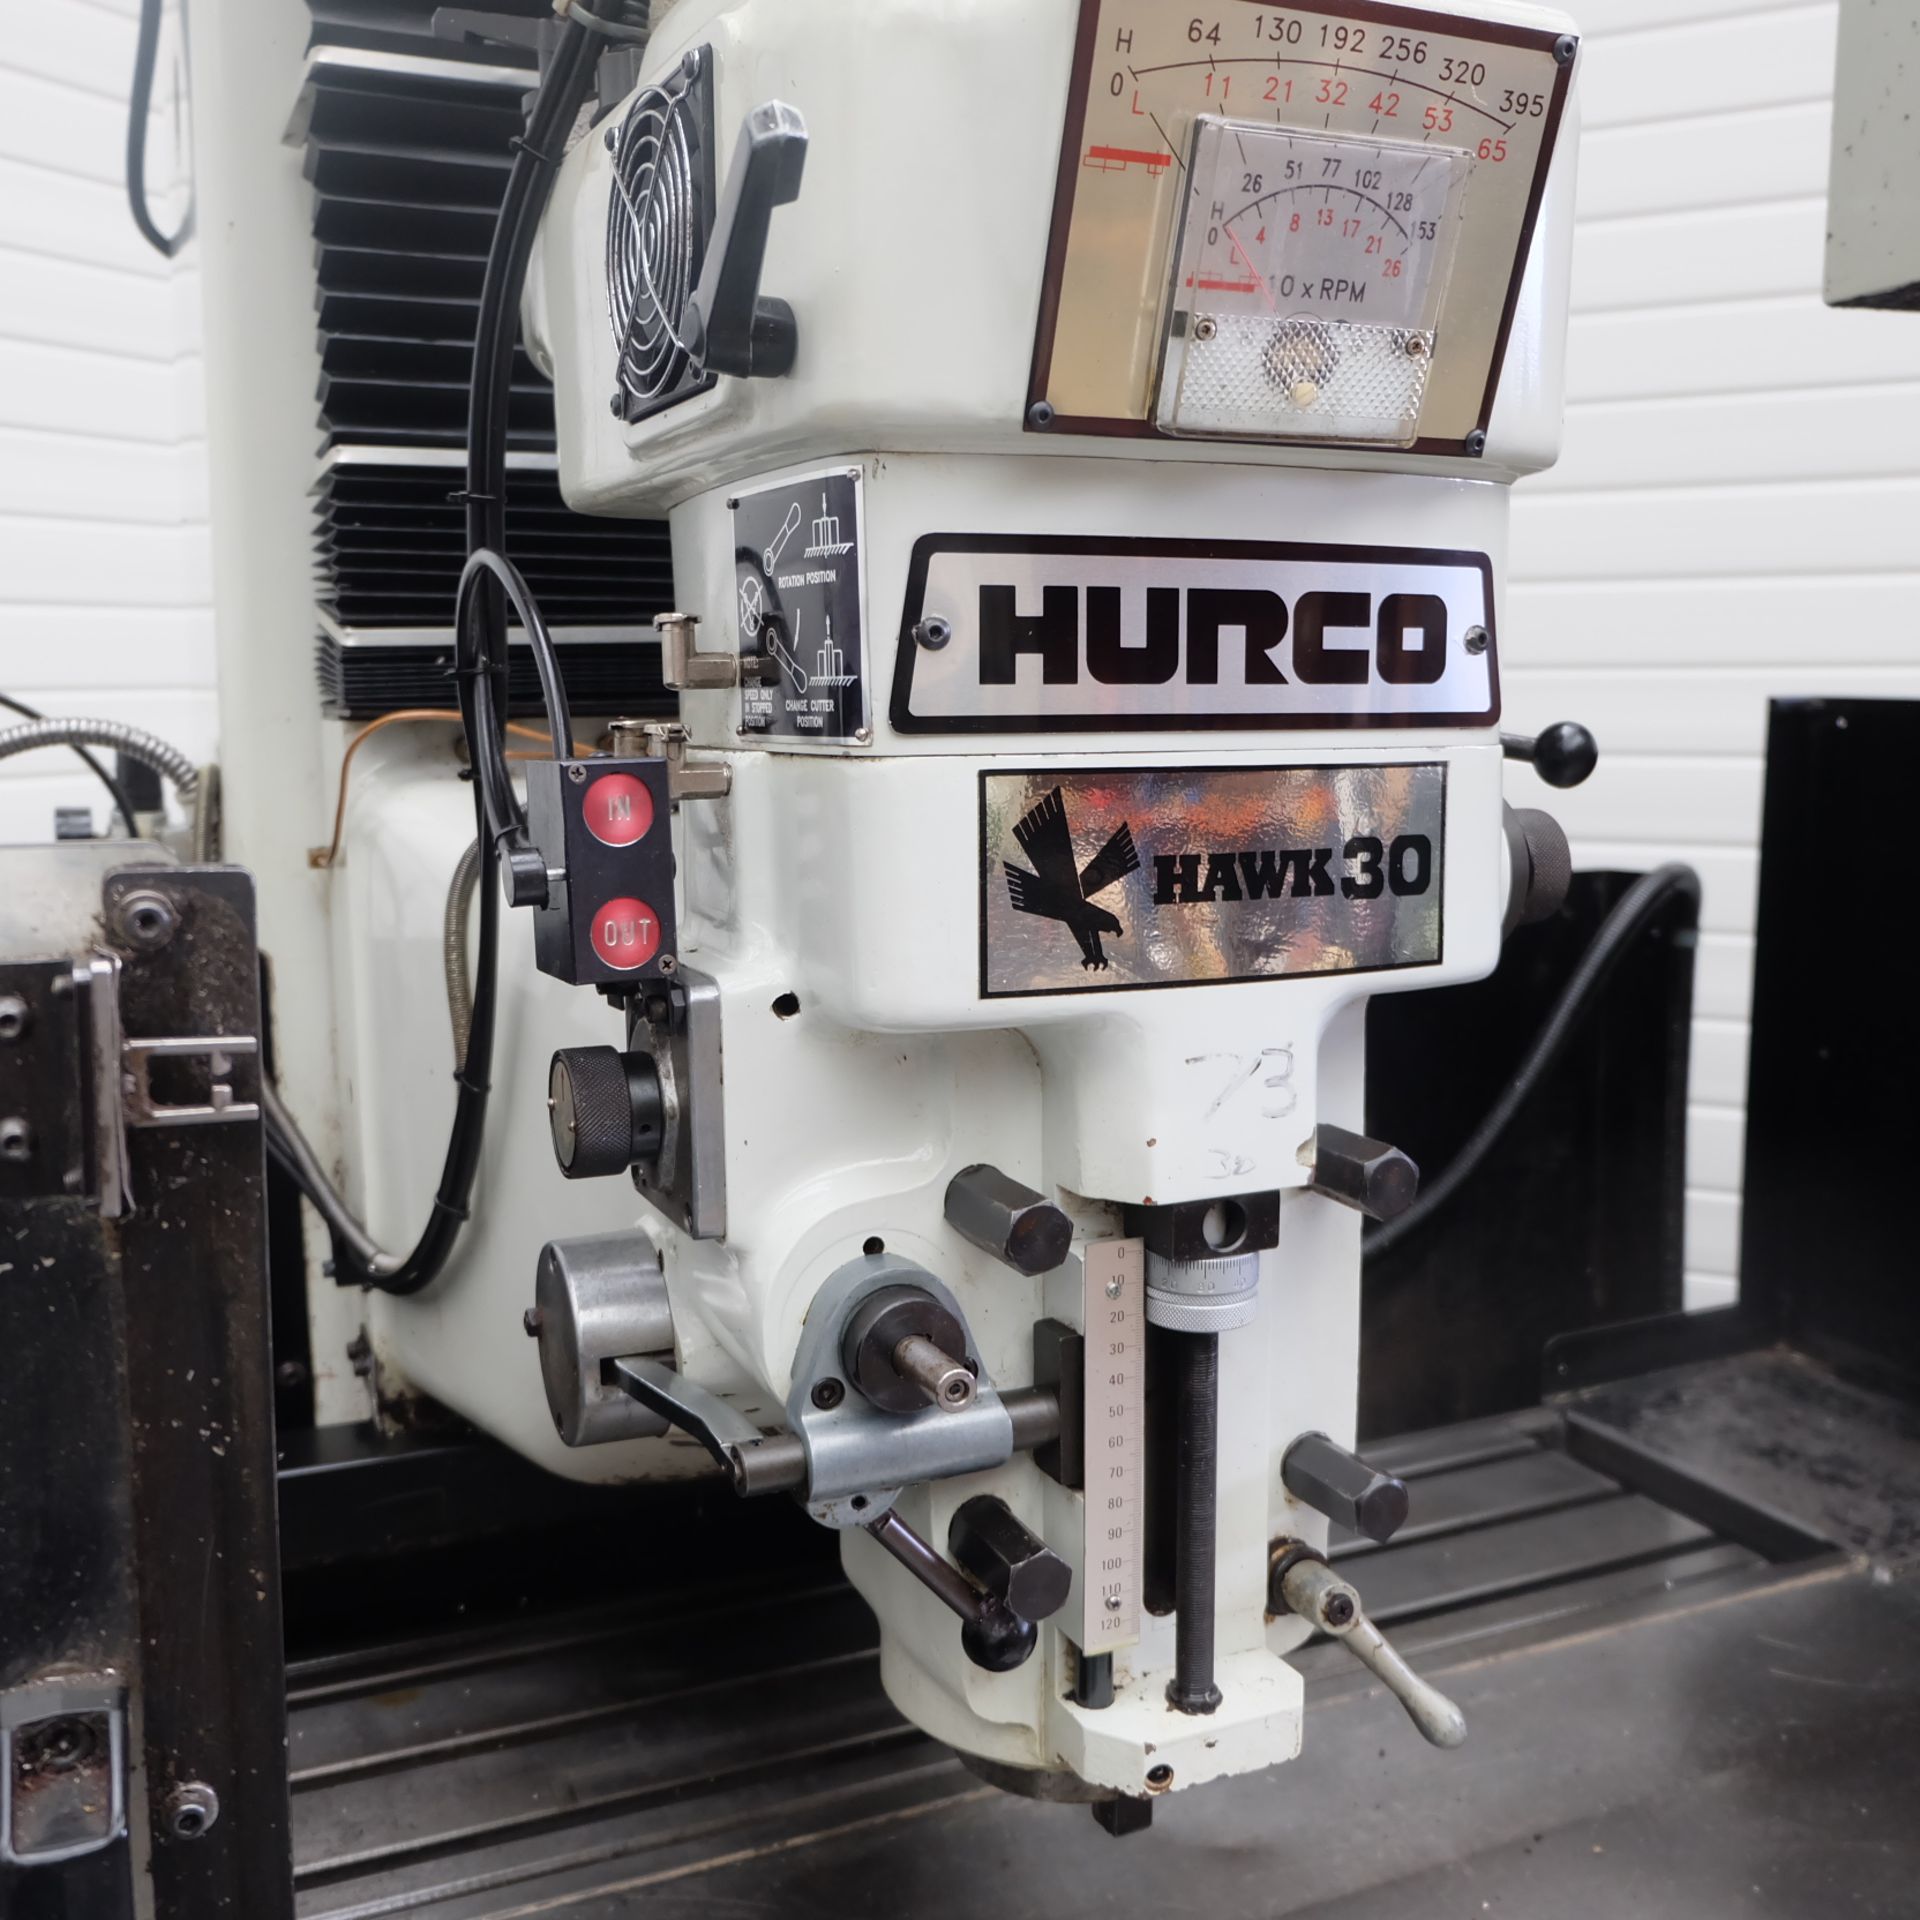 Hurco Hawk 30 CNC 3 Axis Vertical CNC Mill With Ultimax SSM Control. Table Size: 52" x 11". X Axis T - Image 4 of 15